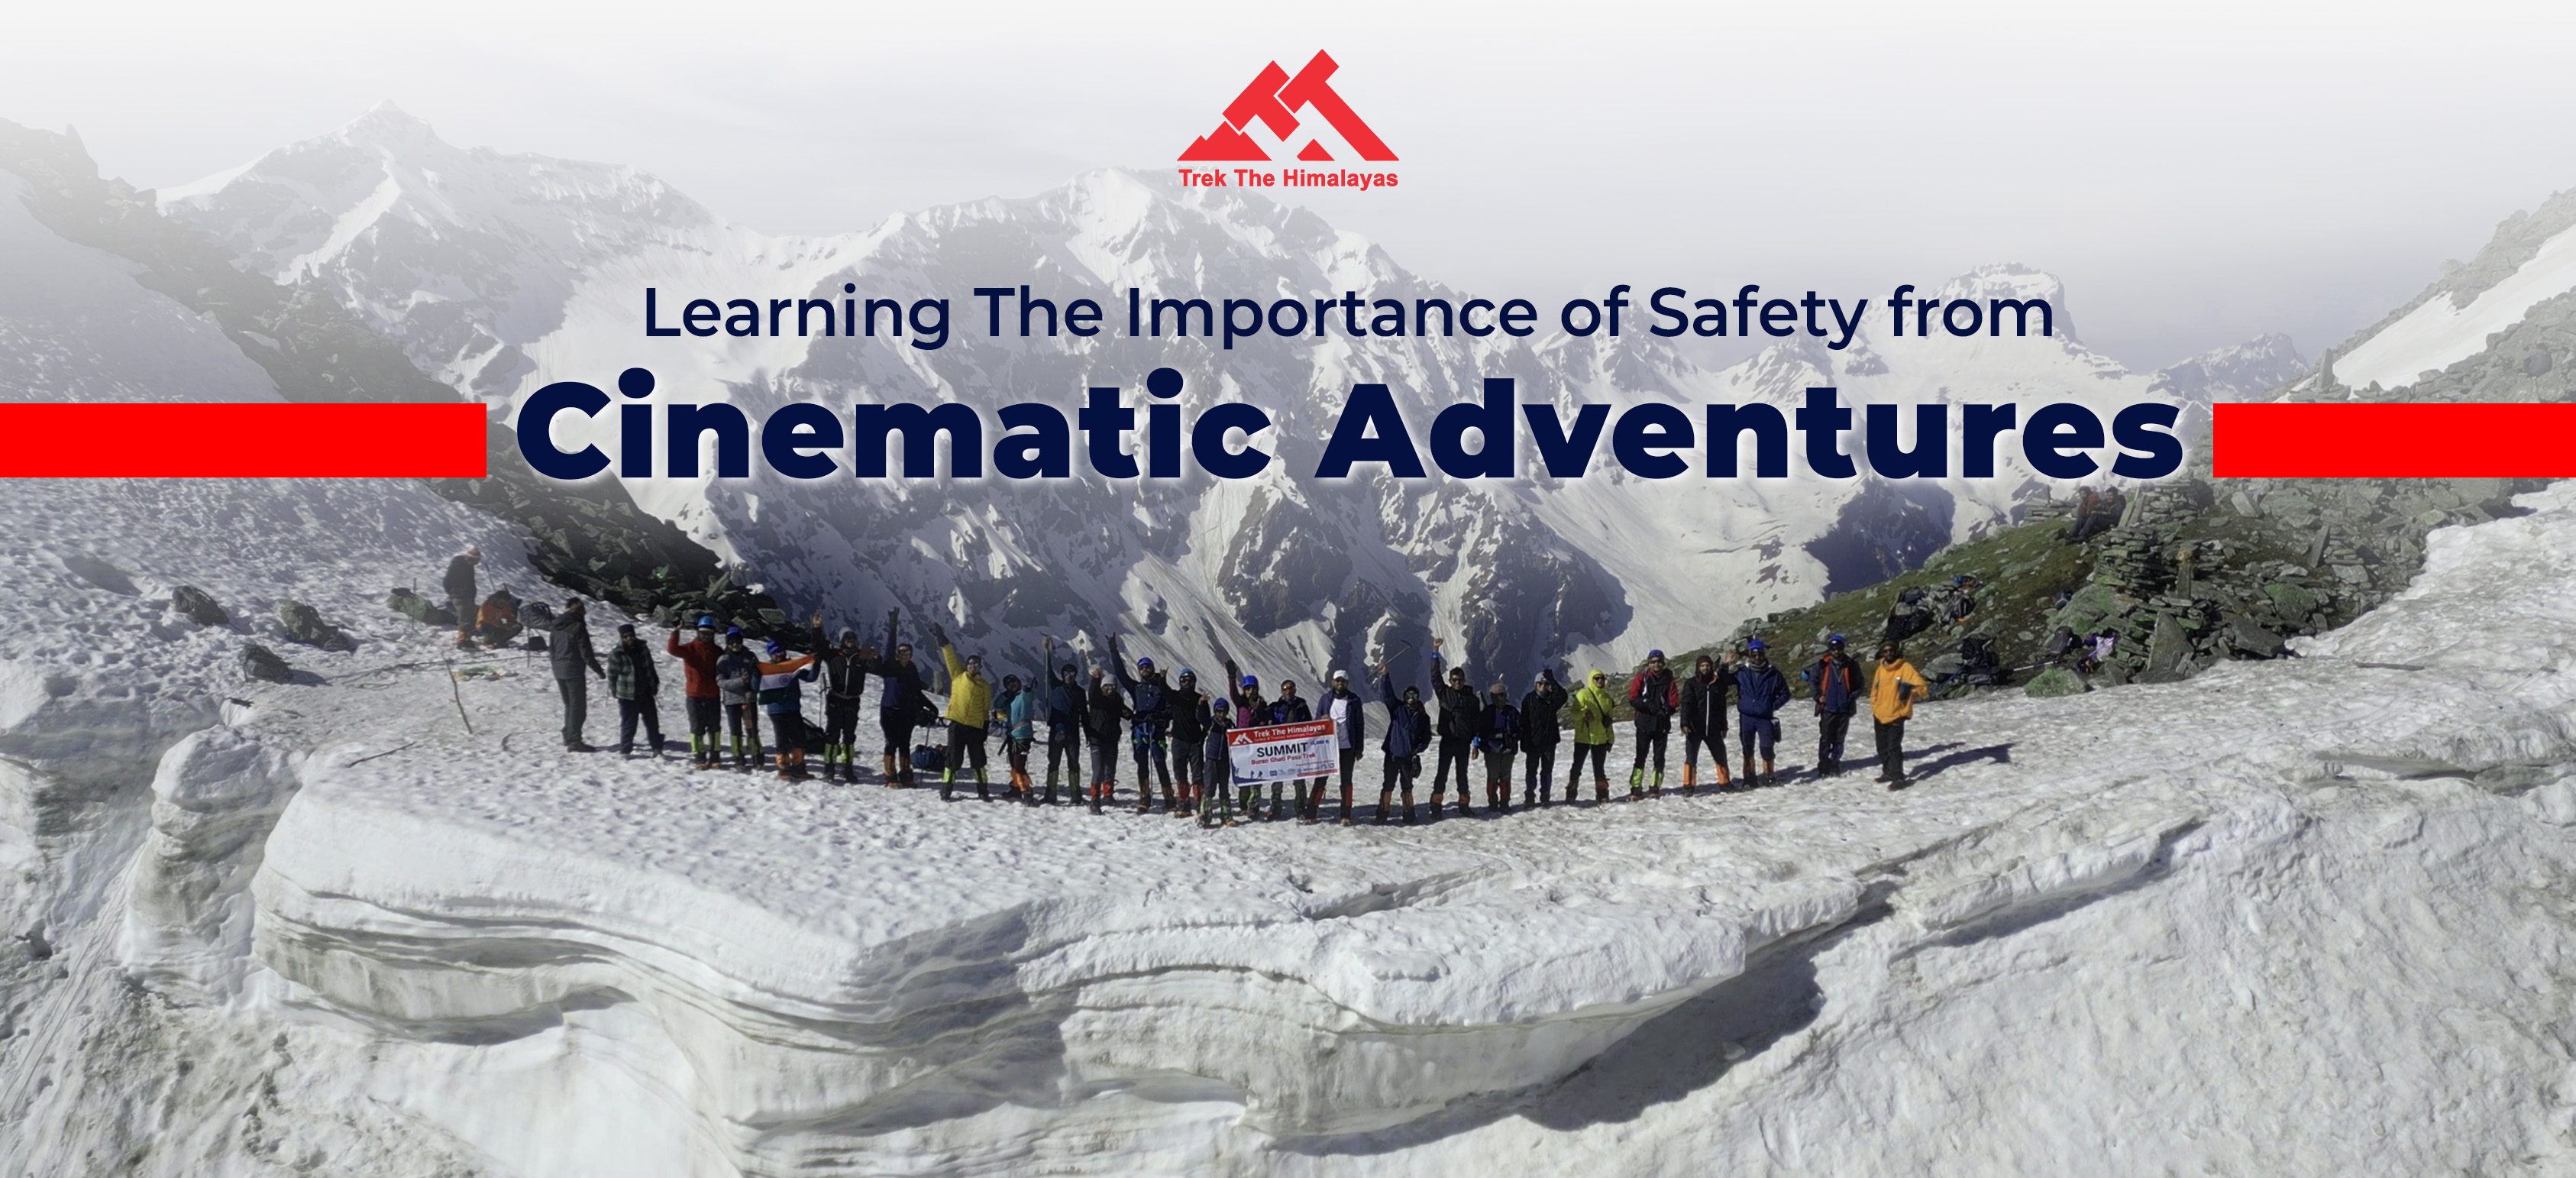 Learning The Importance of Safety from Cinematic Adventures